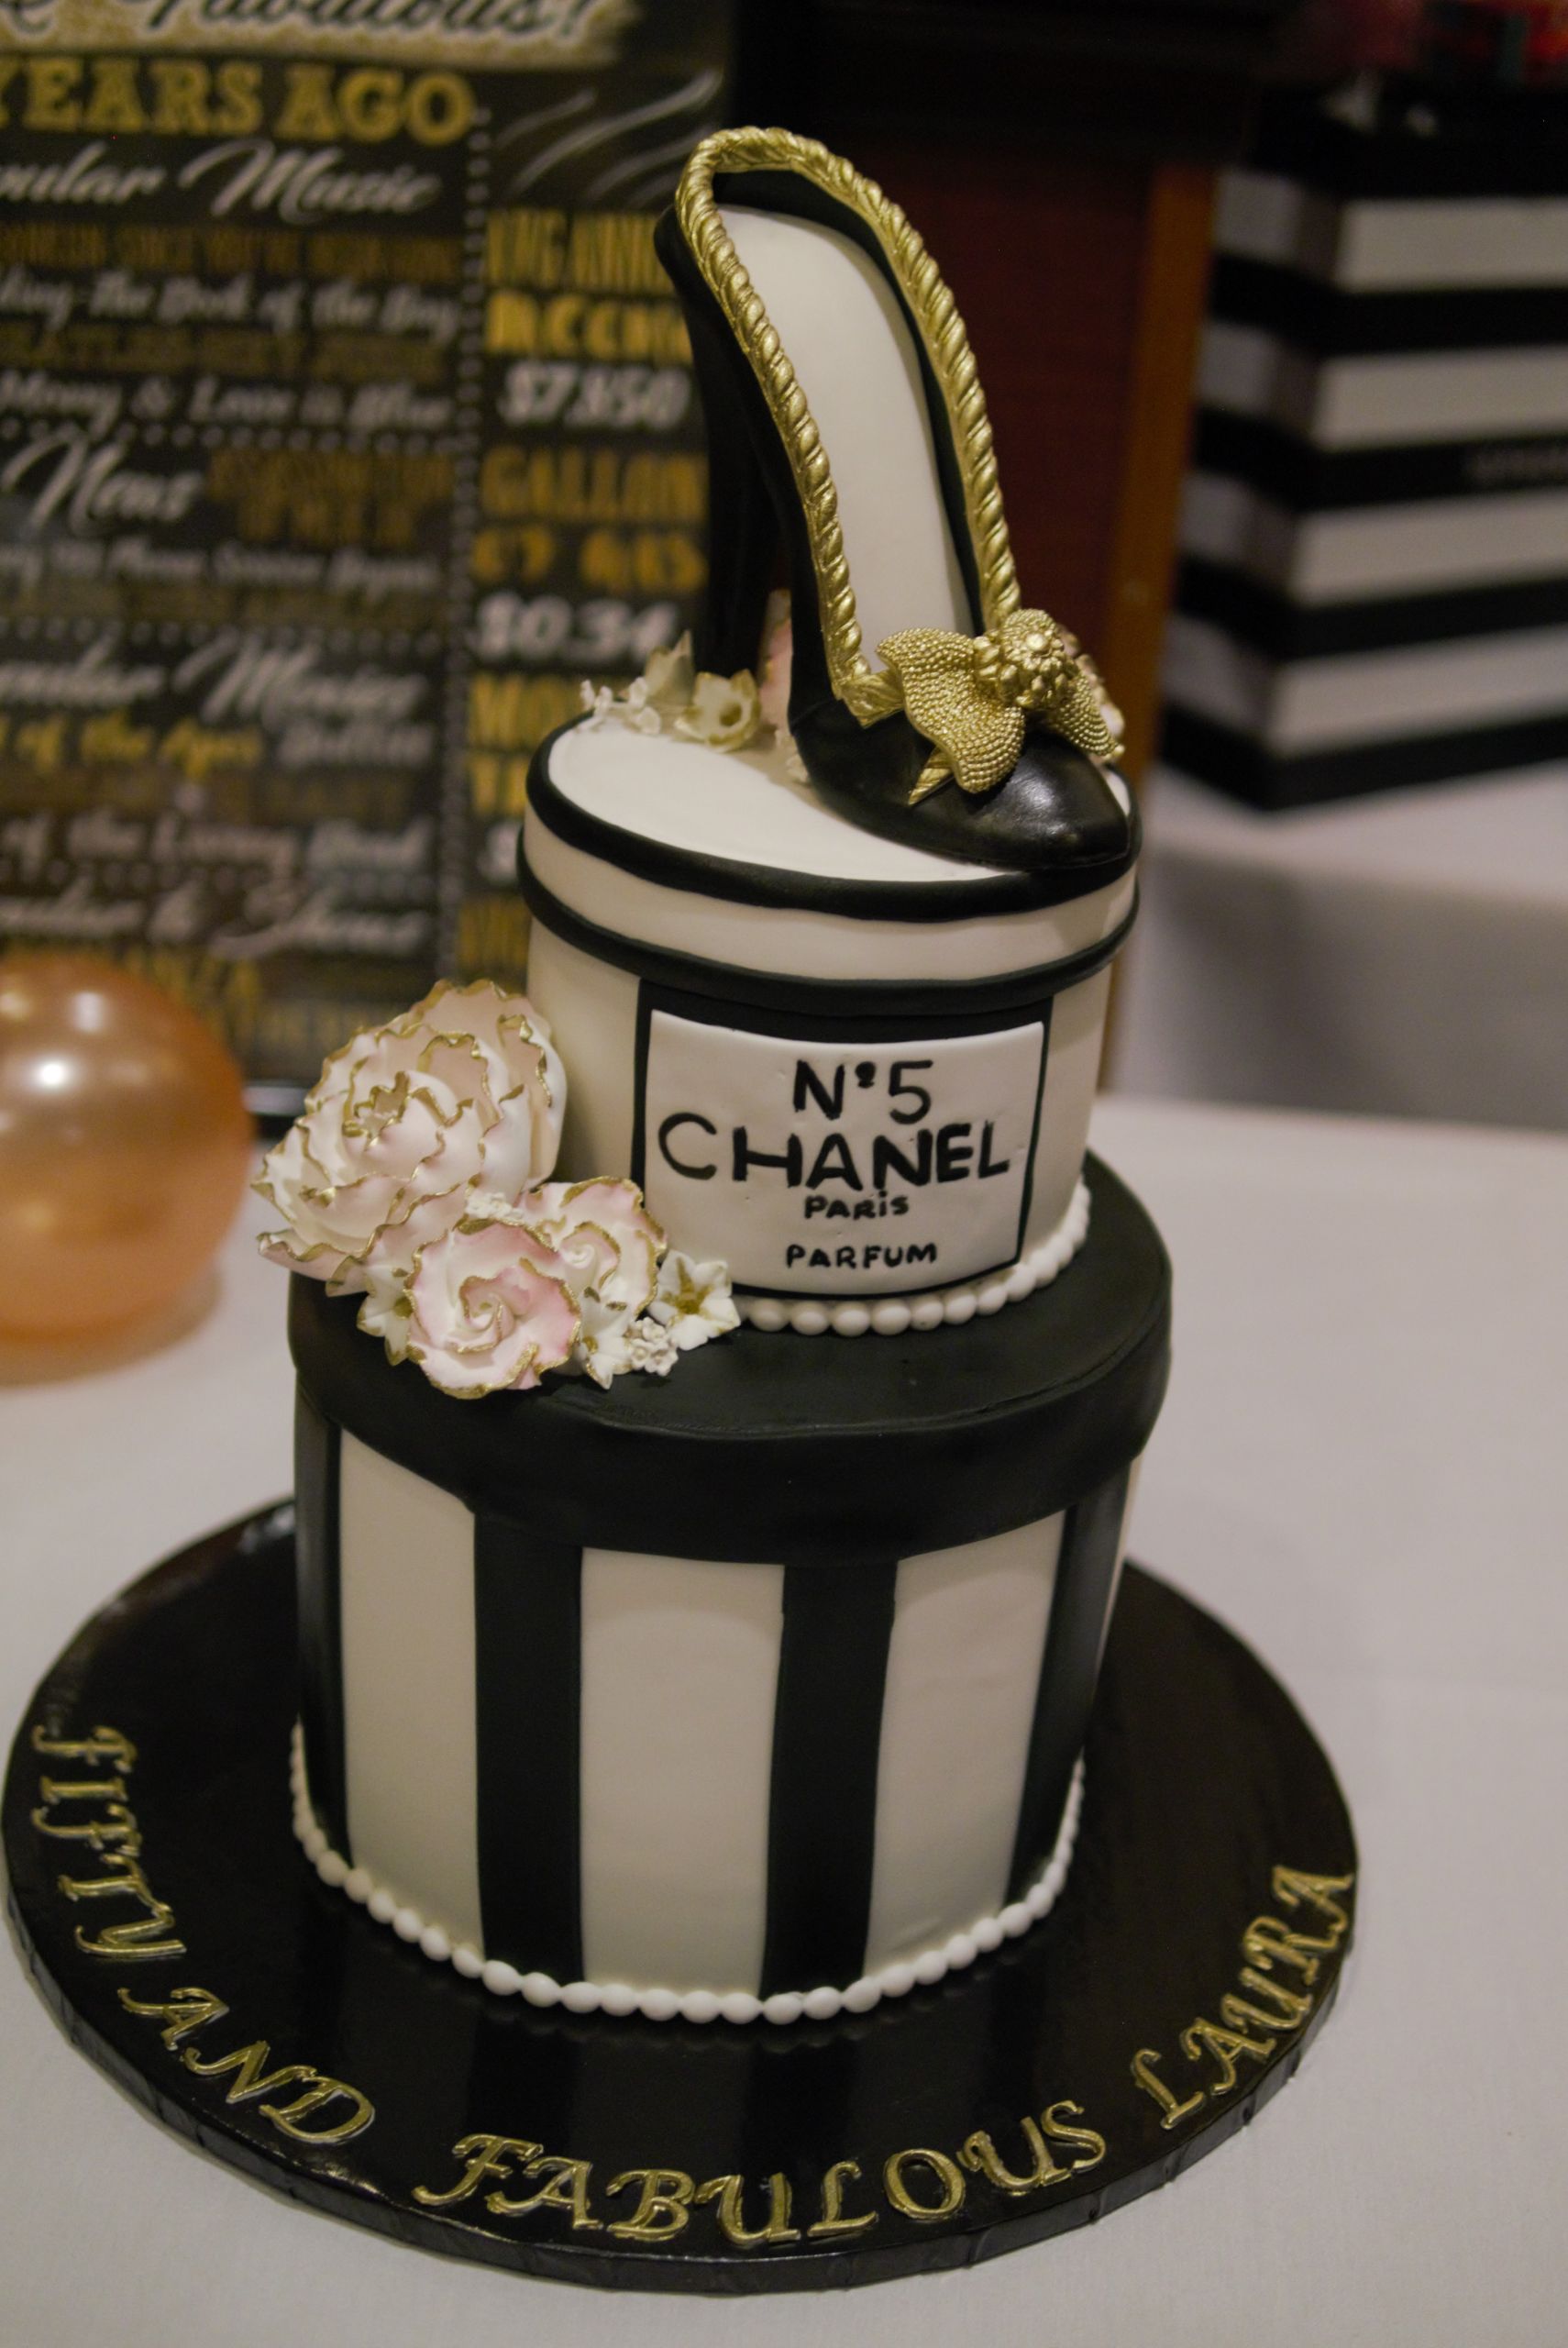 20 Best Classy Birthday Cakes - Home, Family, Style and Art Ideas